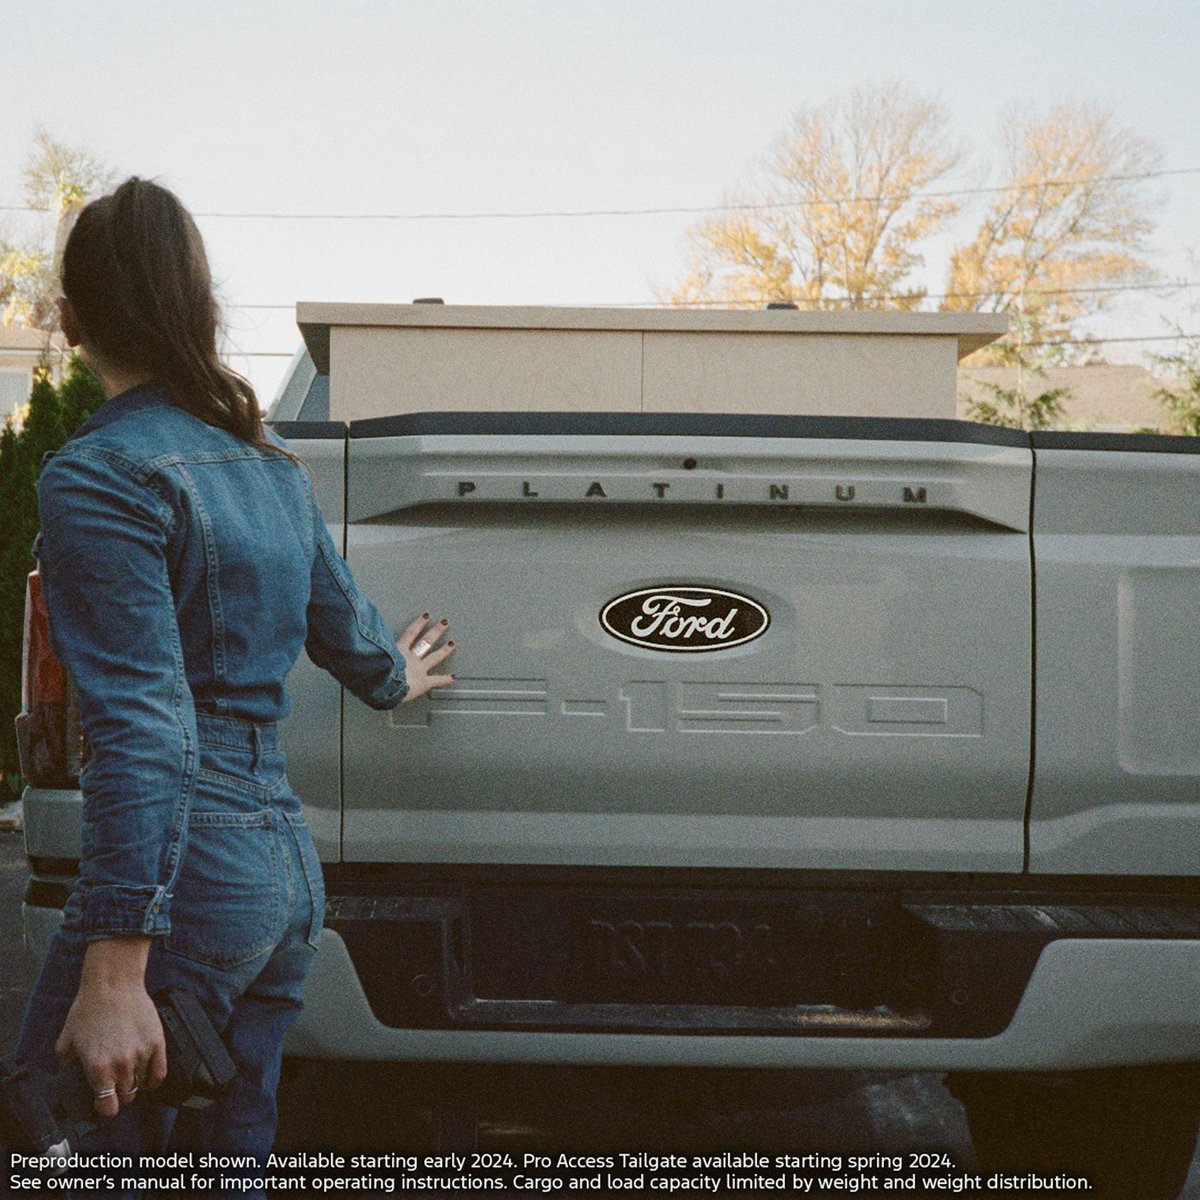 Local businesses trust the new 2024 Ford F-150 Hybrid to enhance their operations. 💼🚛 You can work efficiently at any job site, just like DIY Huntress #FordAmbassador, with the right tools for success! #BuiltFordTough #WorkSmart